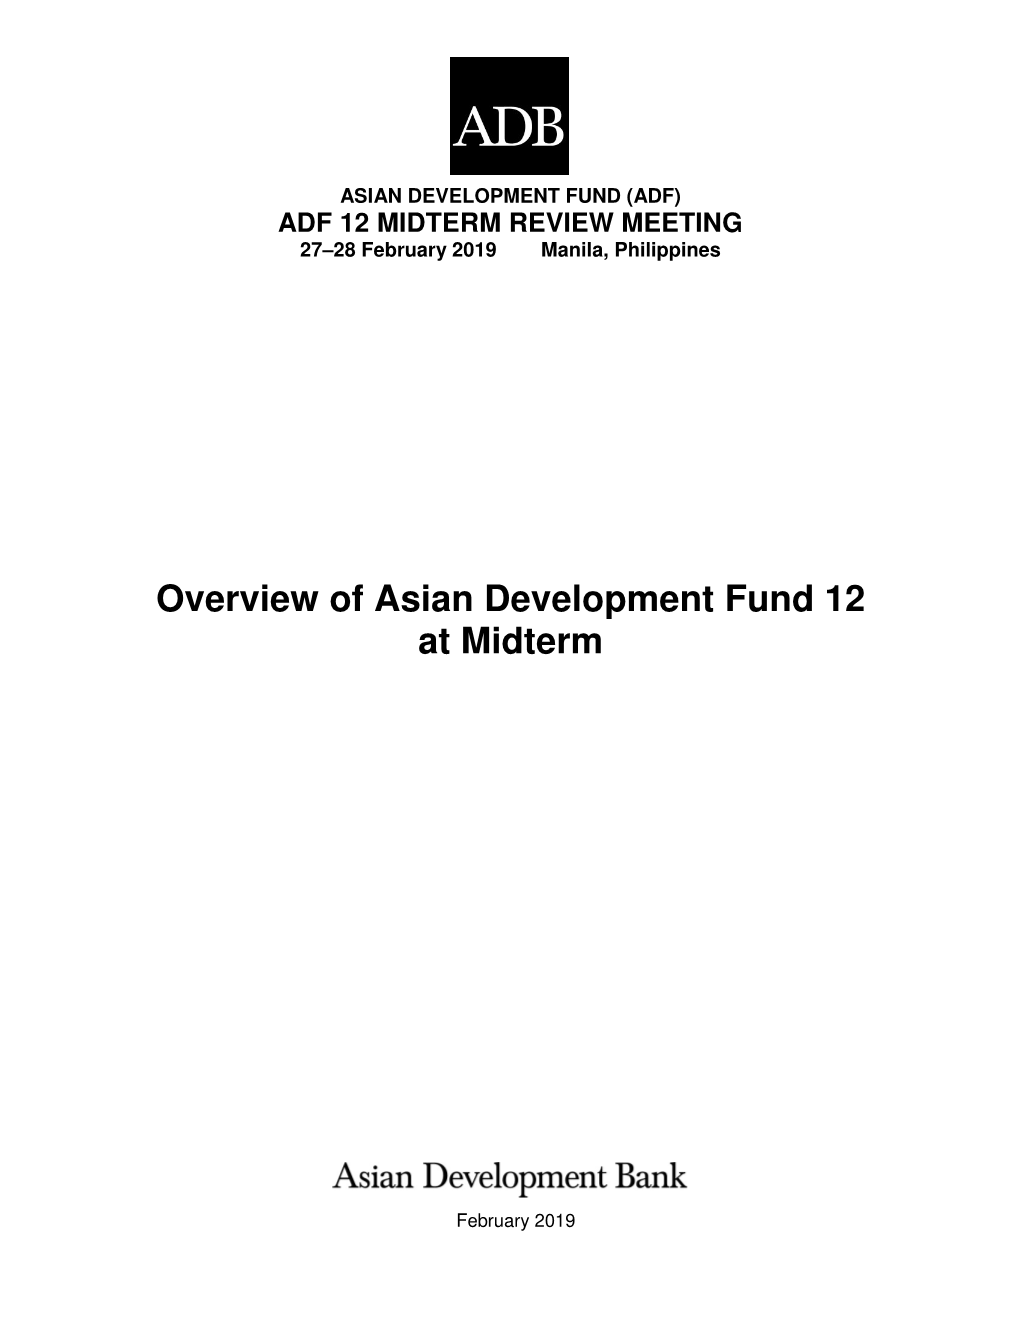 Overview of Asian Development Fund 12 at Midterm